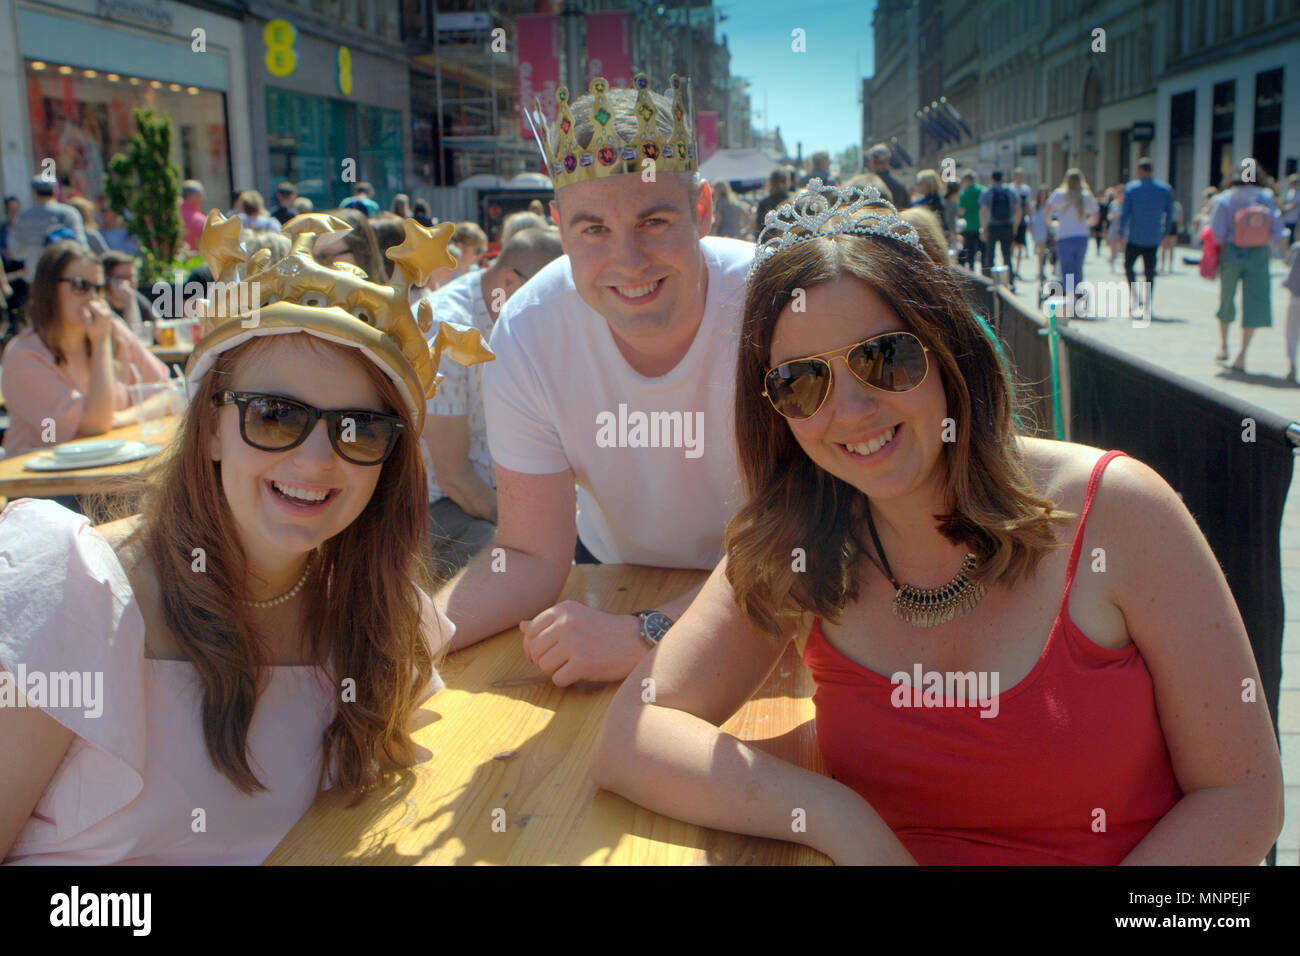 Glasgow, Scotland, UK 19th May.UK Weather: Sunny weather over the city brought the locals and tourists into the streets for taps aff weather.  As the royal wedding was highlighted by early revelers in Buchanan street the style mile fashion centre of Scotland. Gerard Ferry/Alamy news Stock Photo